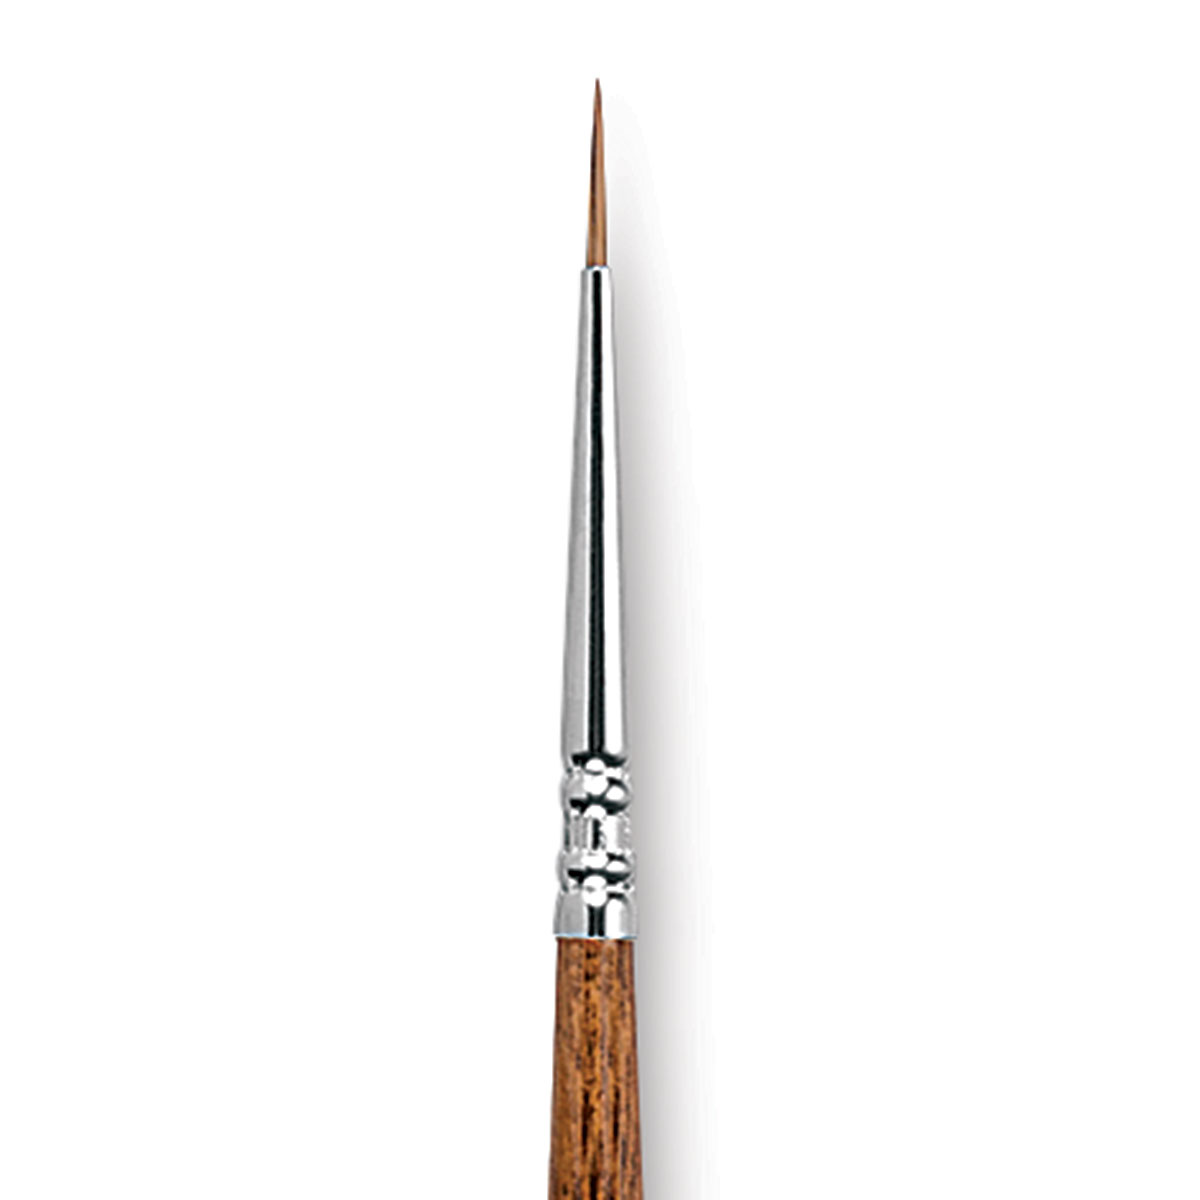 Escoda Versatil Series 1540 Artist Watercolor and Acrylic Short Handle Paint  Brush Synthetic Kolinsky Pointed Round Size 10 Size 10 Pointed Round